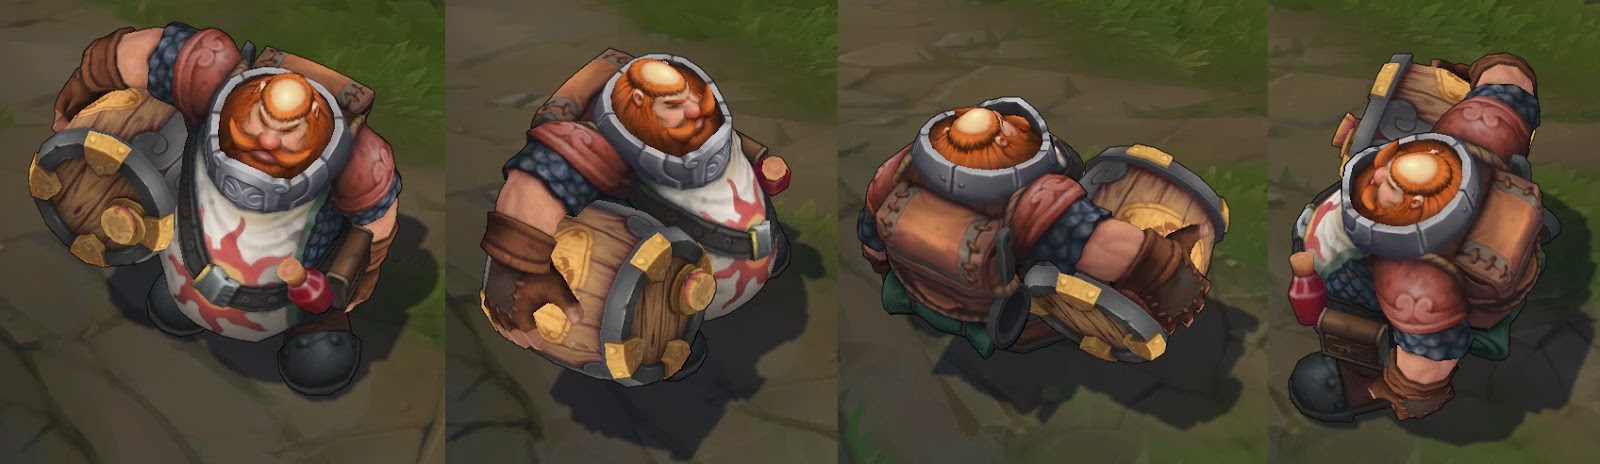 Gragas Skins: The best skins of Gragas (with Images)